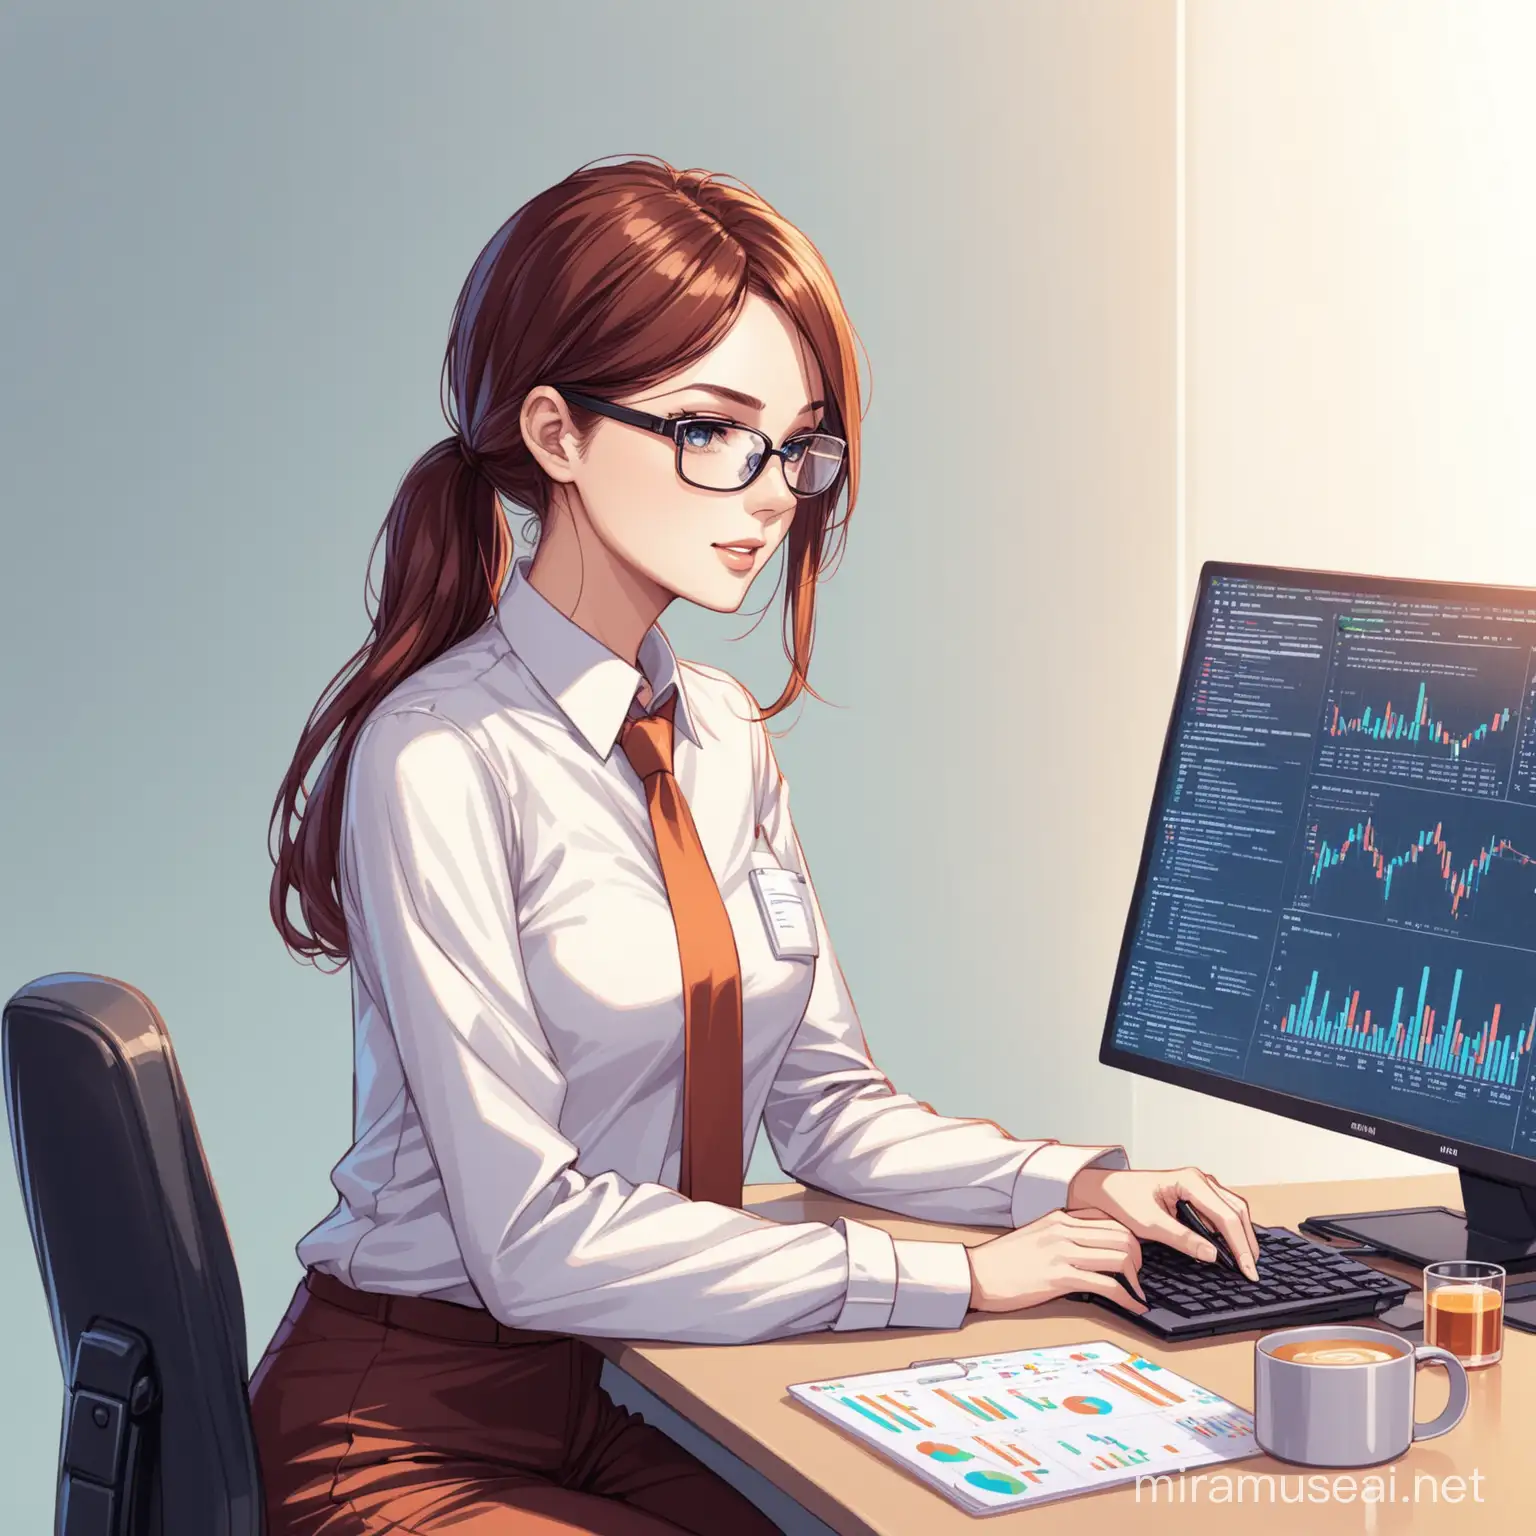 Data Analyst Analyzing Financial Charts on Computer